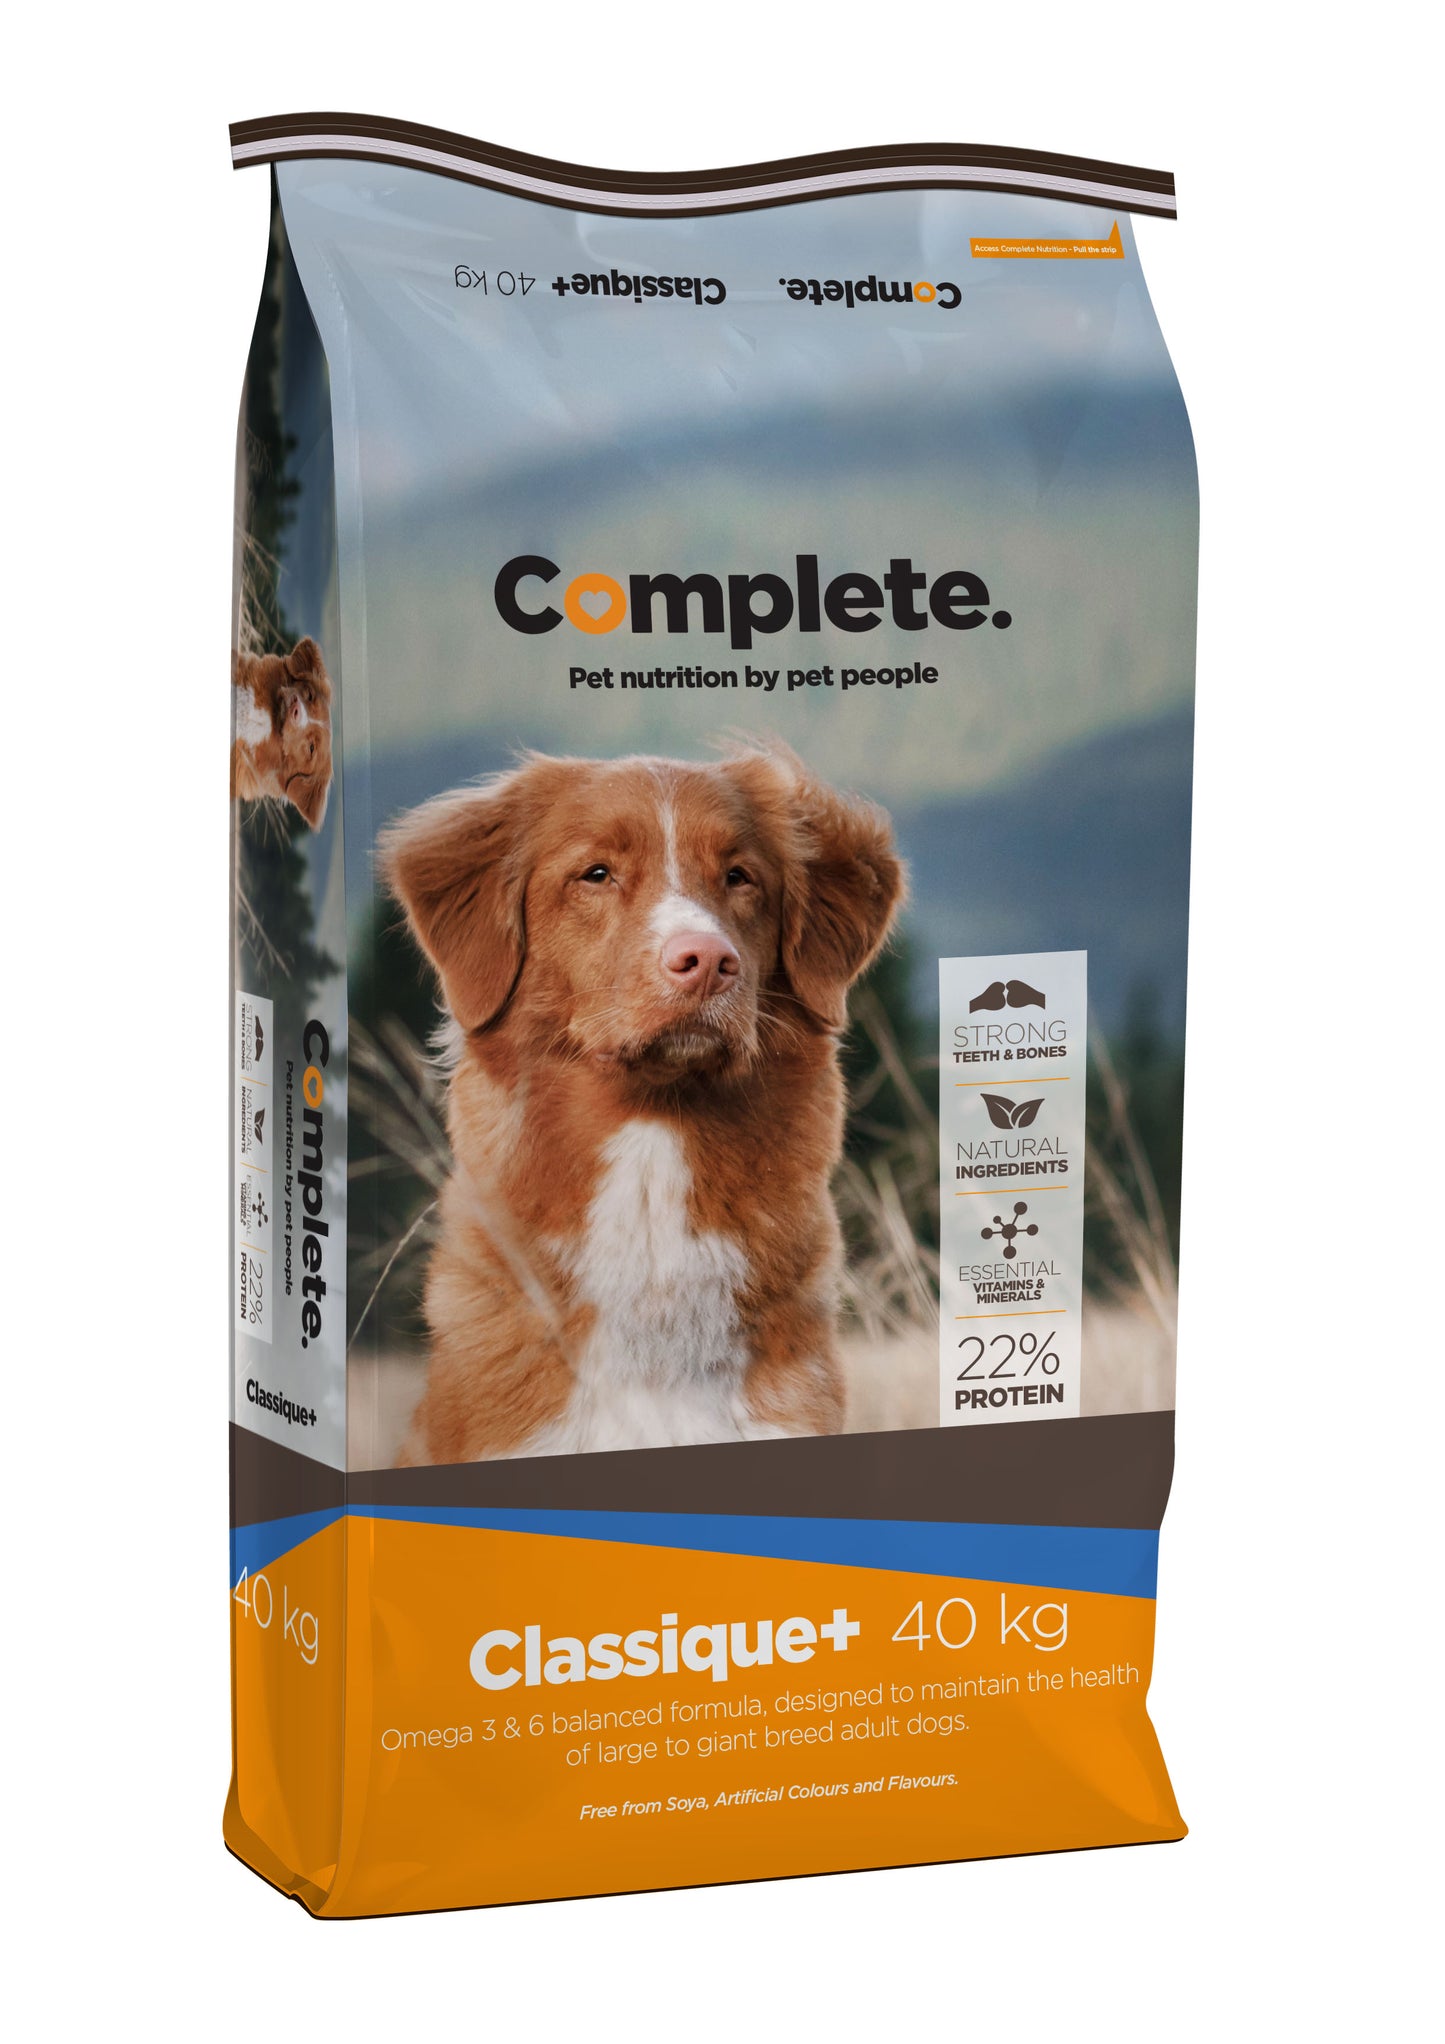 Classique+ 40kg Complete Pet Food For Large & Giant breed adult dogs from Pets Planet - South Africa’s No.1 Online Pet Store for premium pet products, best pet store near me, Dog food, pet food, dog wet food, dog bed, dog beds, washable dog bed, takealot dog bed, plush dog bed, Complete Pet Nutrition, Complete pet nutrition dog food, hills dog food, optimizor dog food, royal canin dog food, jock dog food, bobtail dog food, canine cuisine, acana dog food, best dog food, dog food near me, best dog food brands